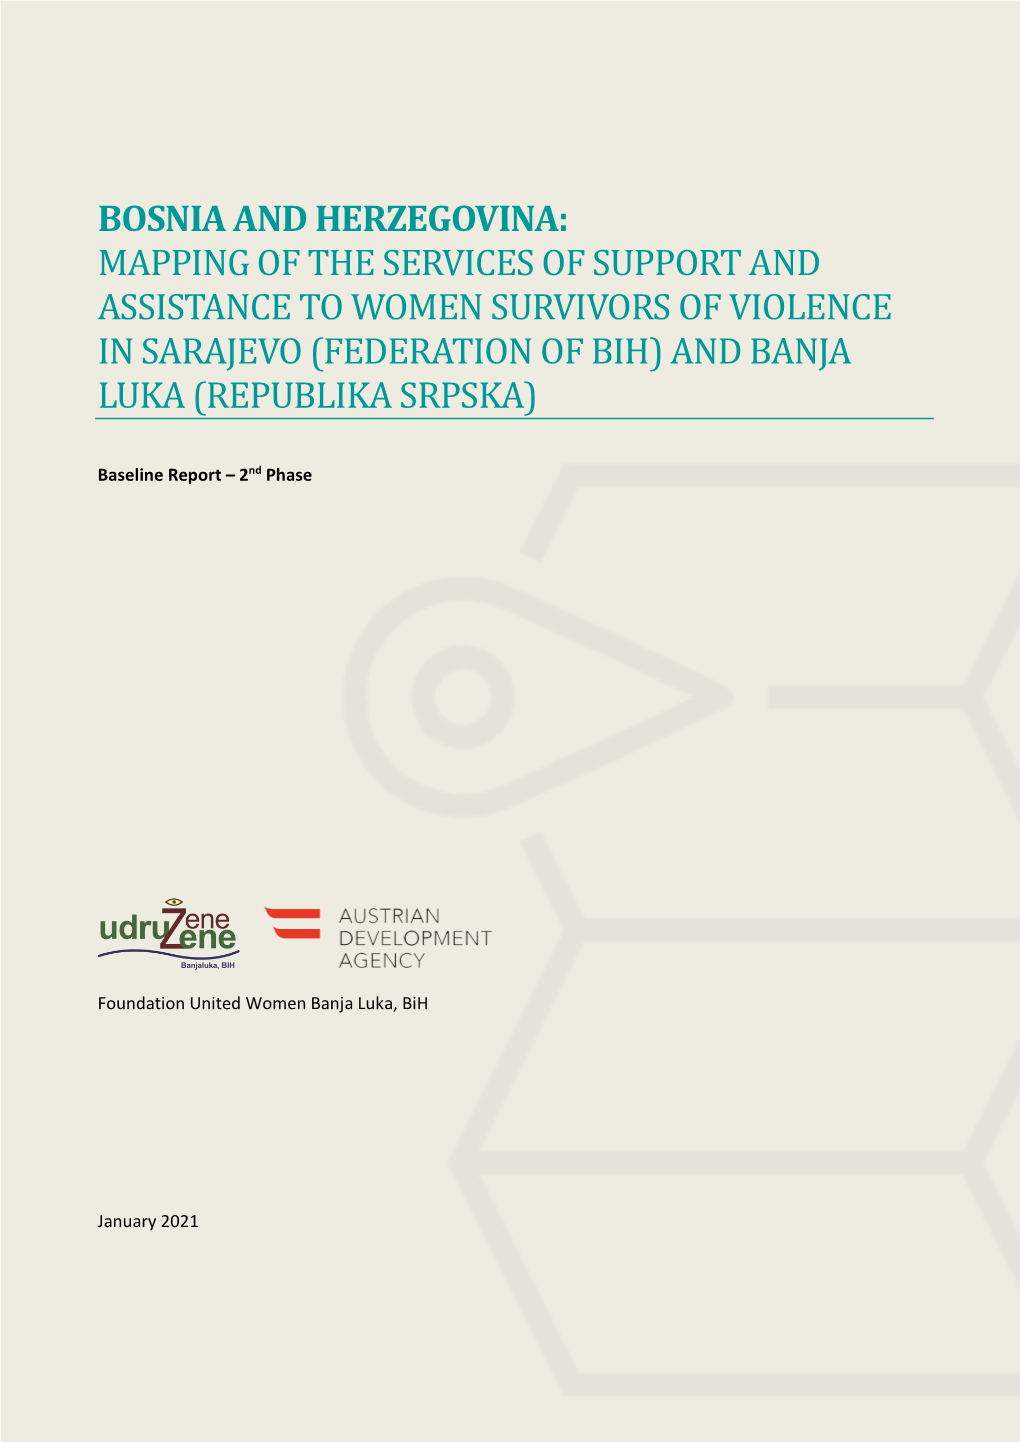 Mapping of the Services of Support and Assistance to Women Survivors of Violence in Sarajevo (Federation of Bih) and Banja Luka (Republika Srpska)